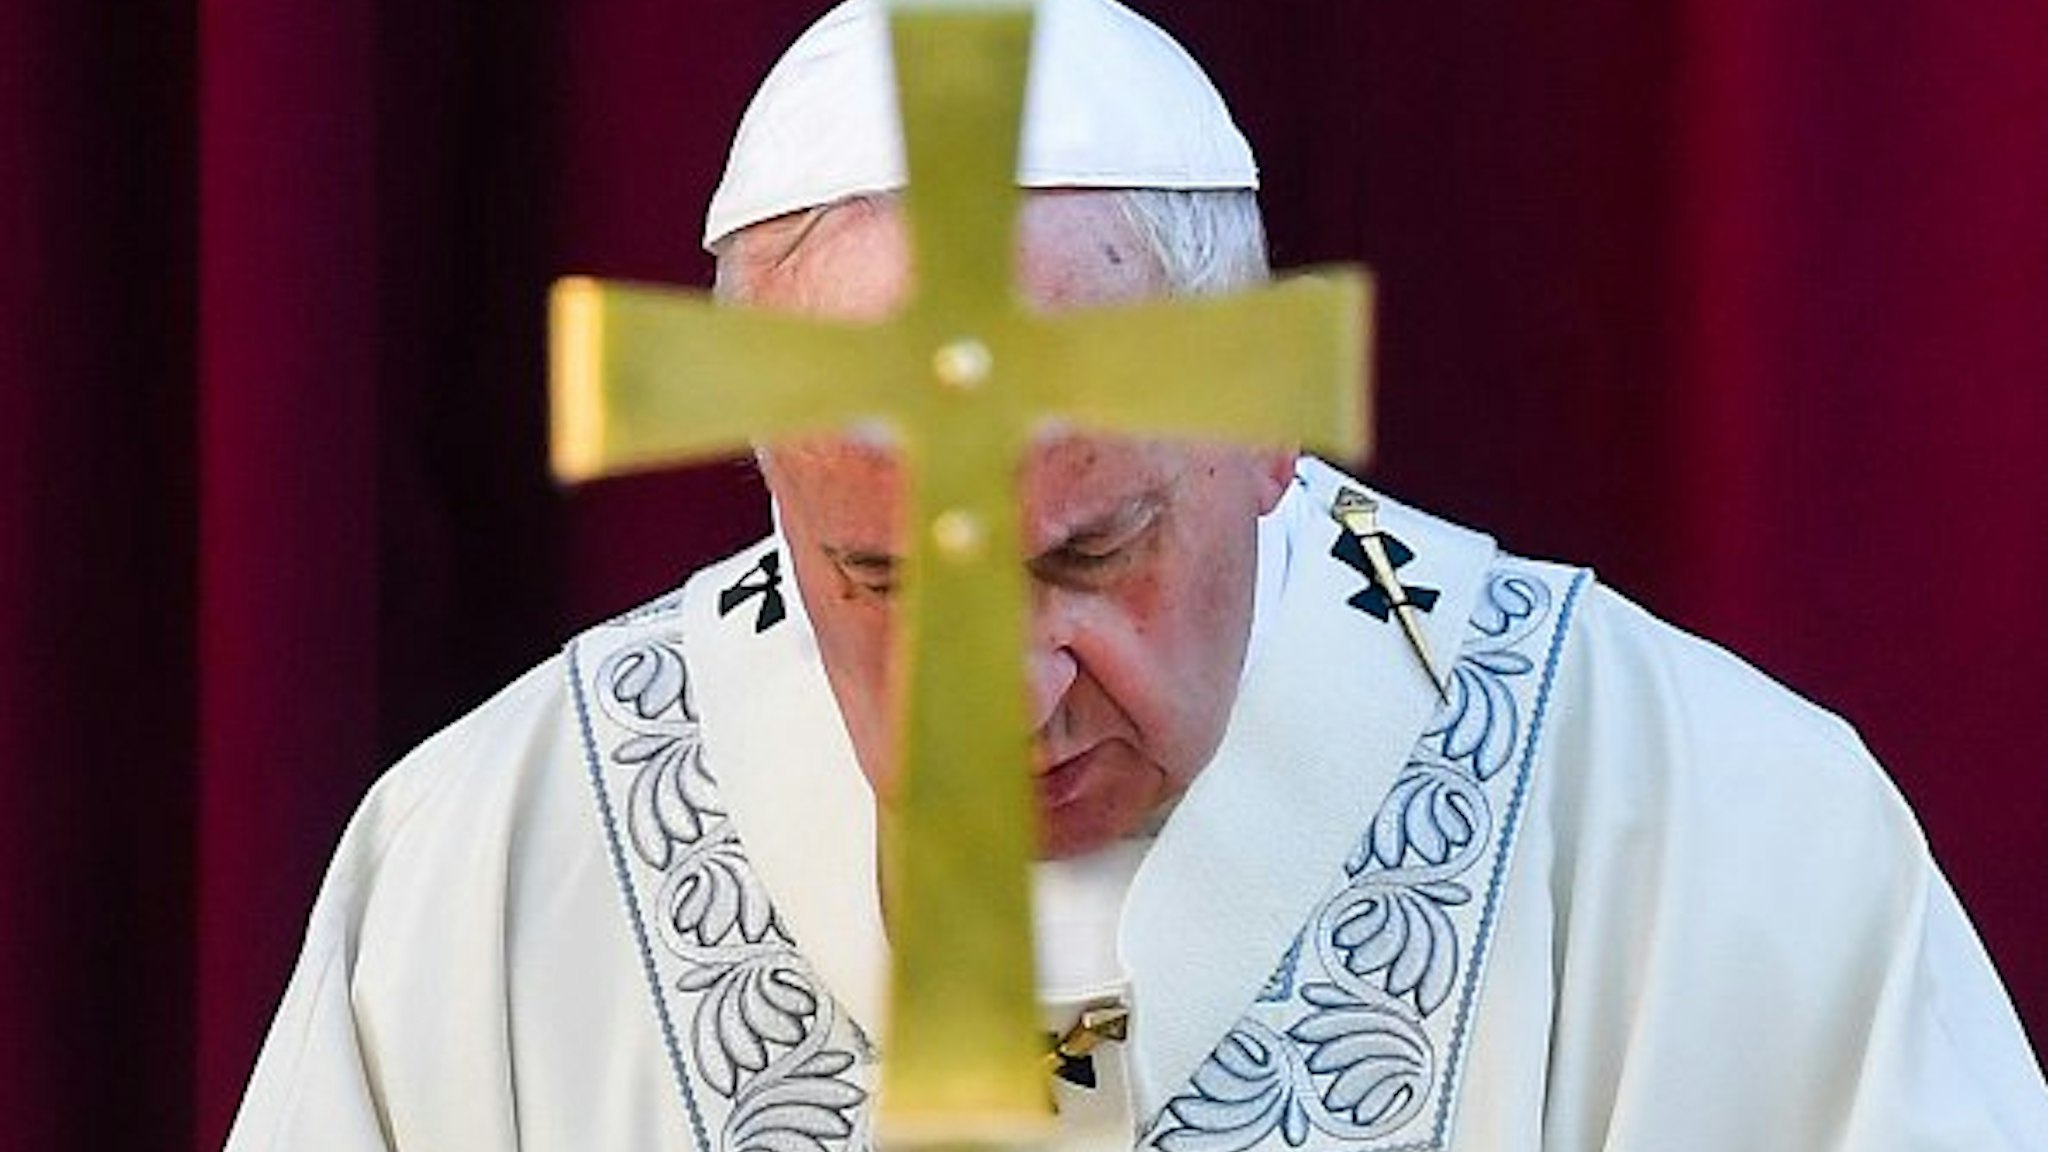 Pope Francis prays as he celebrates a mass for the Feast of Corpus Christi in the parish of Santa Maria Consolatrice in Romes Casal Bertone neighborhood on June 23, 2019.